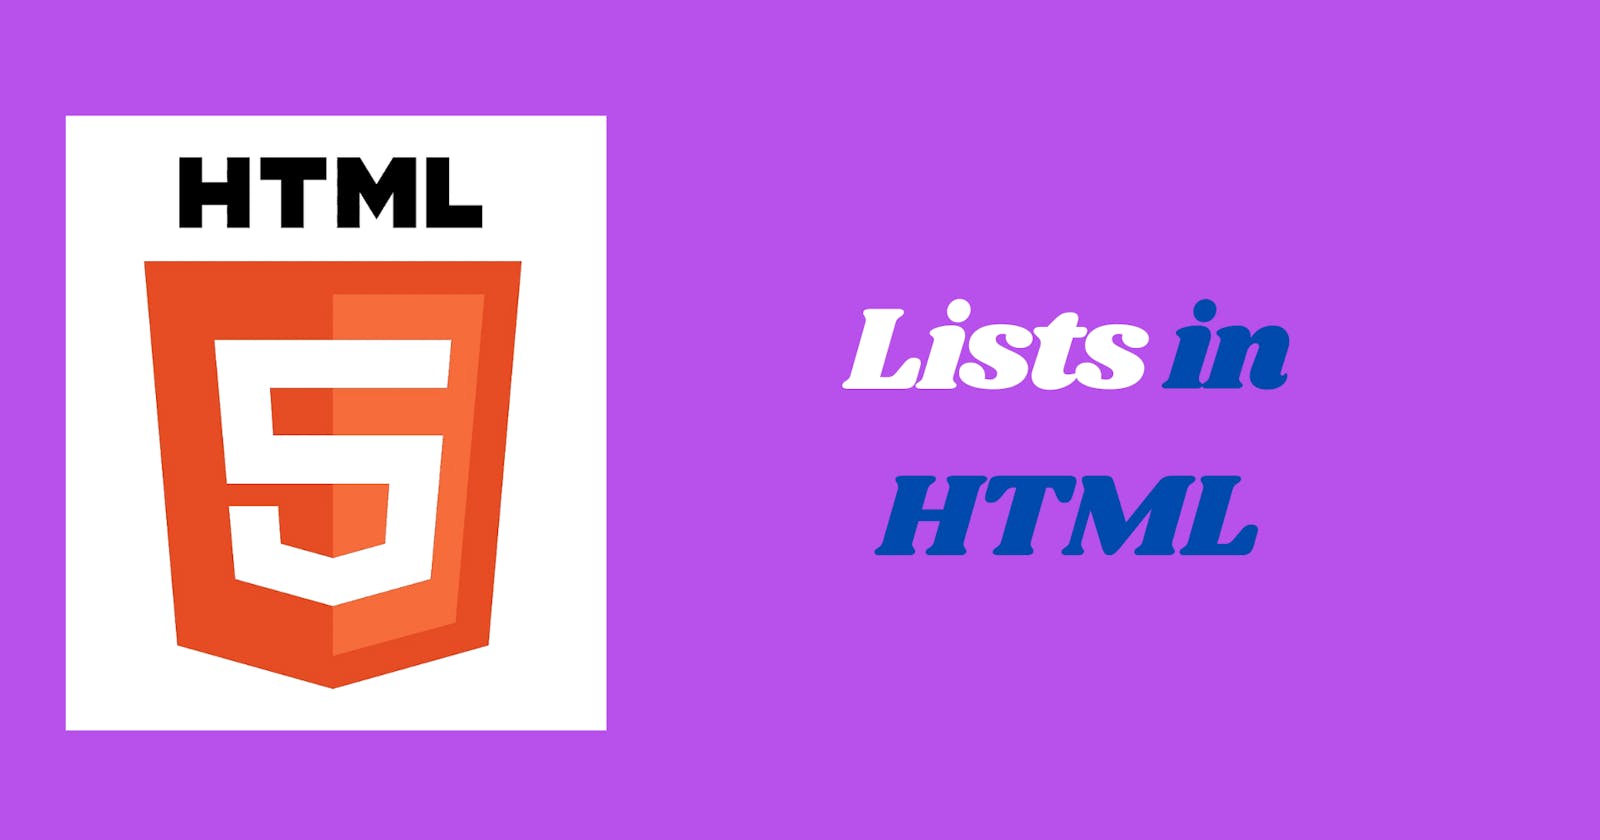 Lists in Html